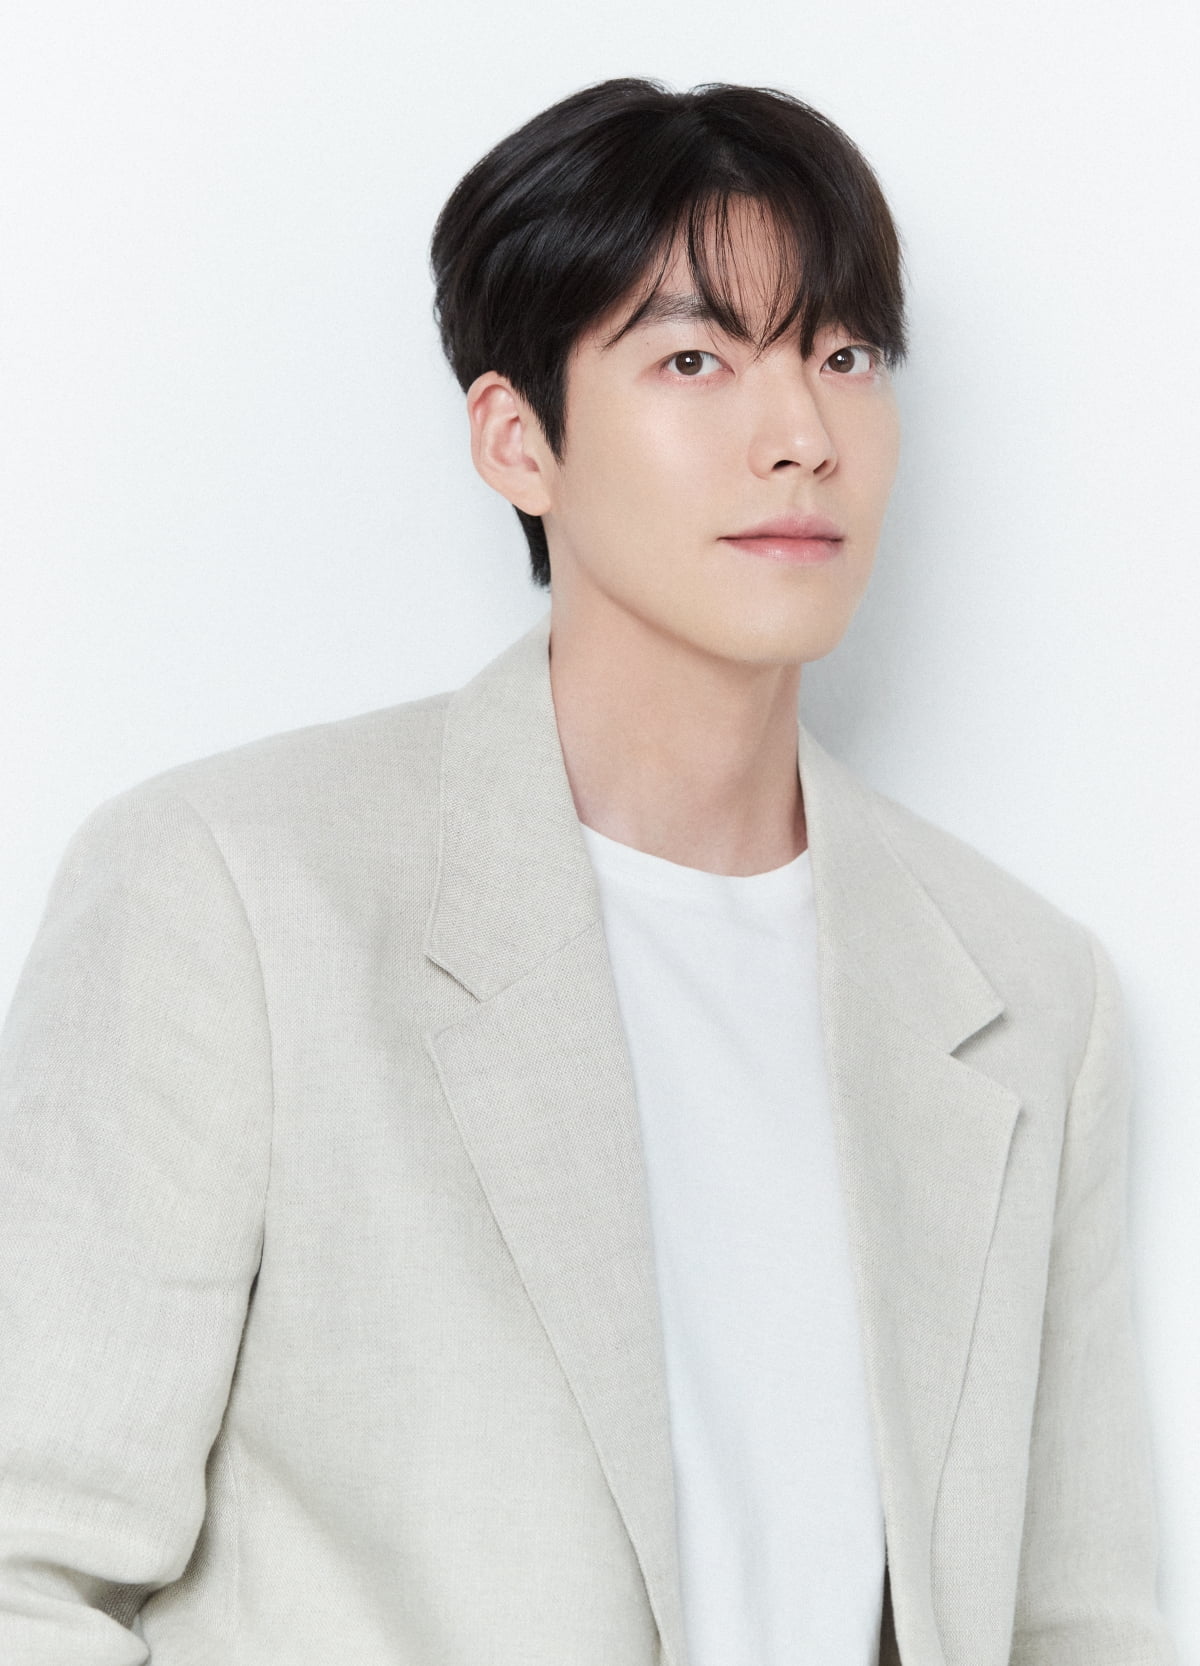 ‘Kongkong red bean’ farming is a warm-up... Kim Woo-bin, ‘Aliens + Humans’ Part 2 → ‘It will all come true’, wide-ranging move